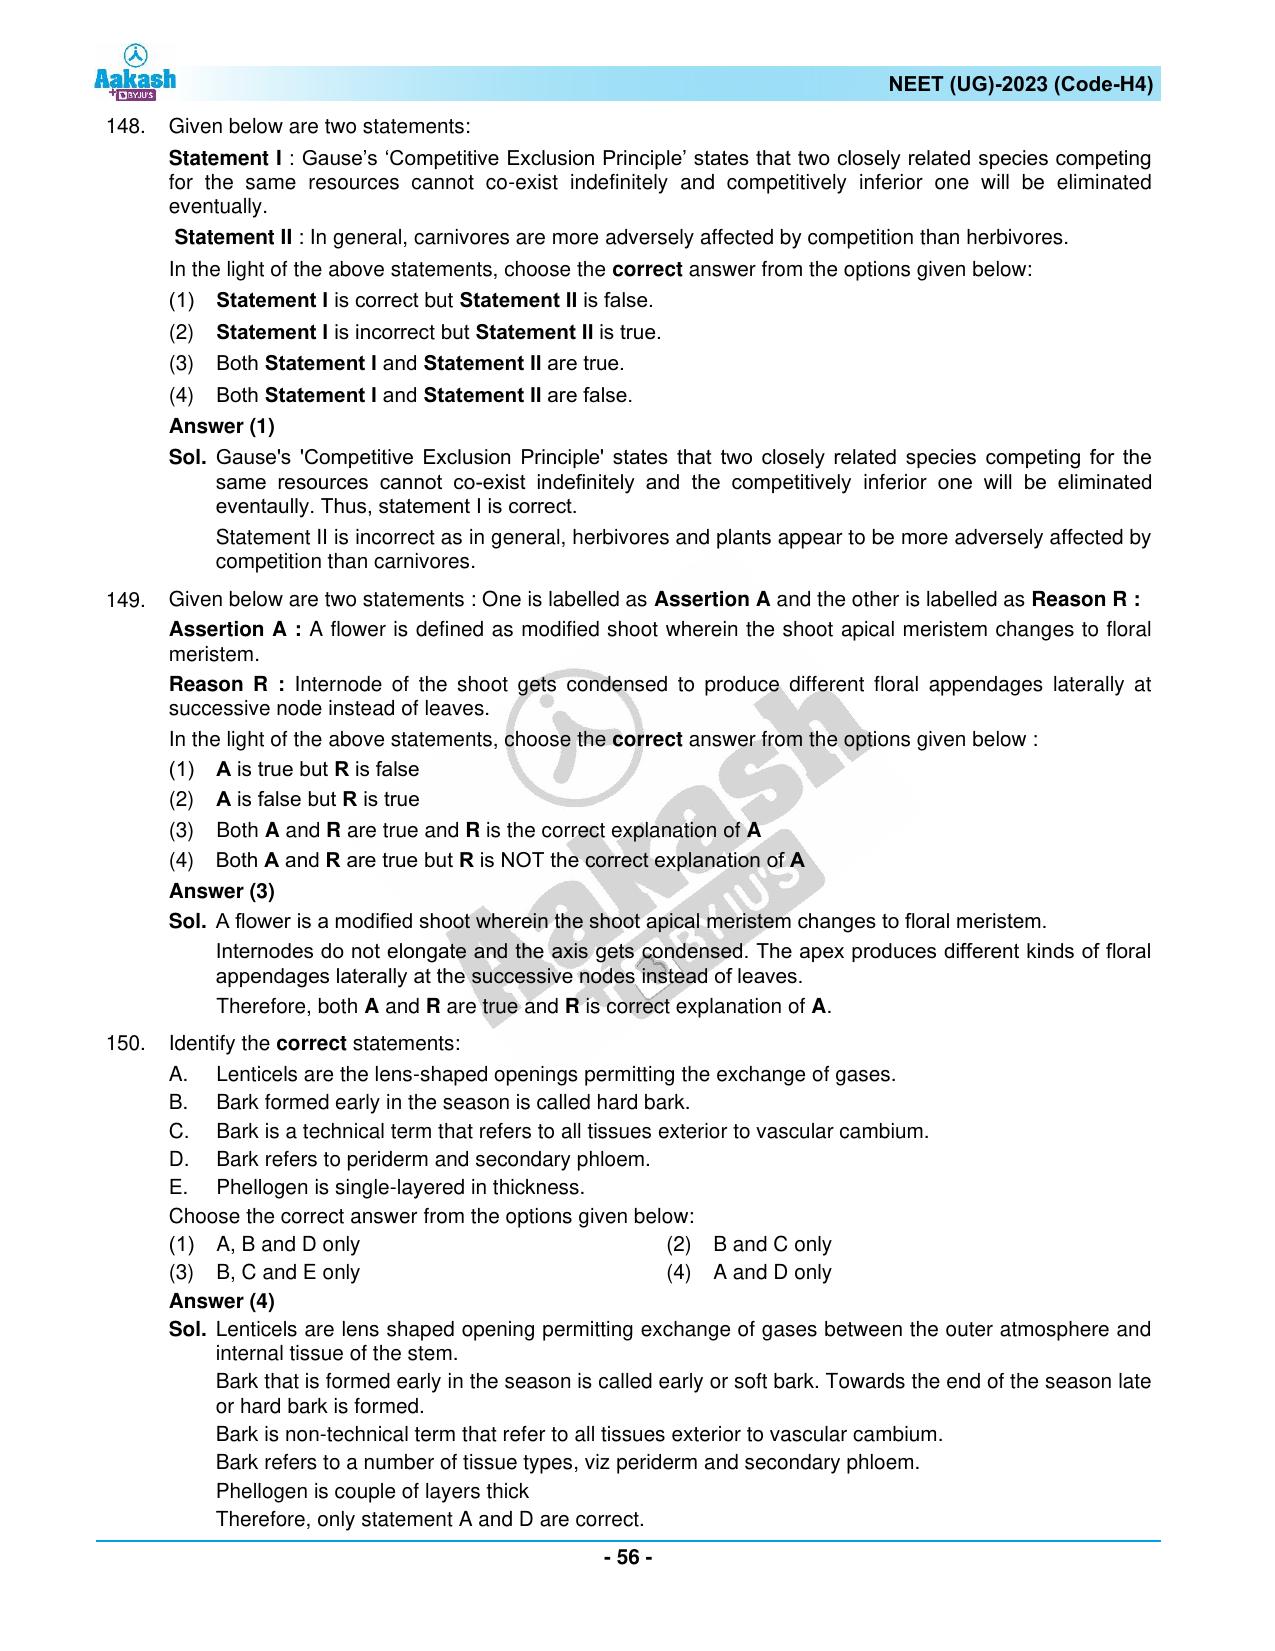 NEET 2023 Question Paper H4 - Page 56